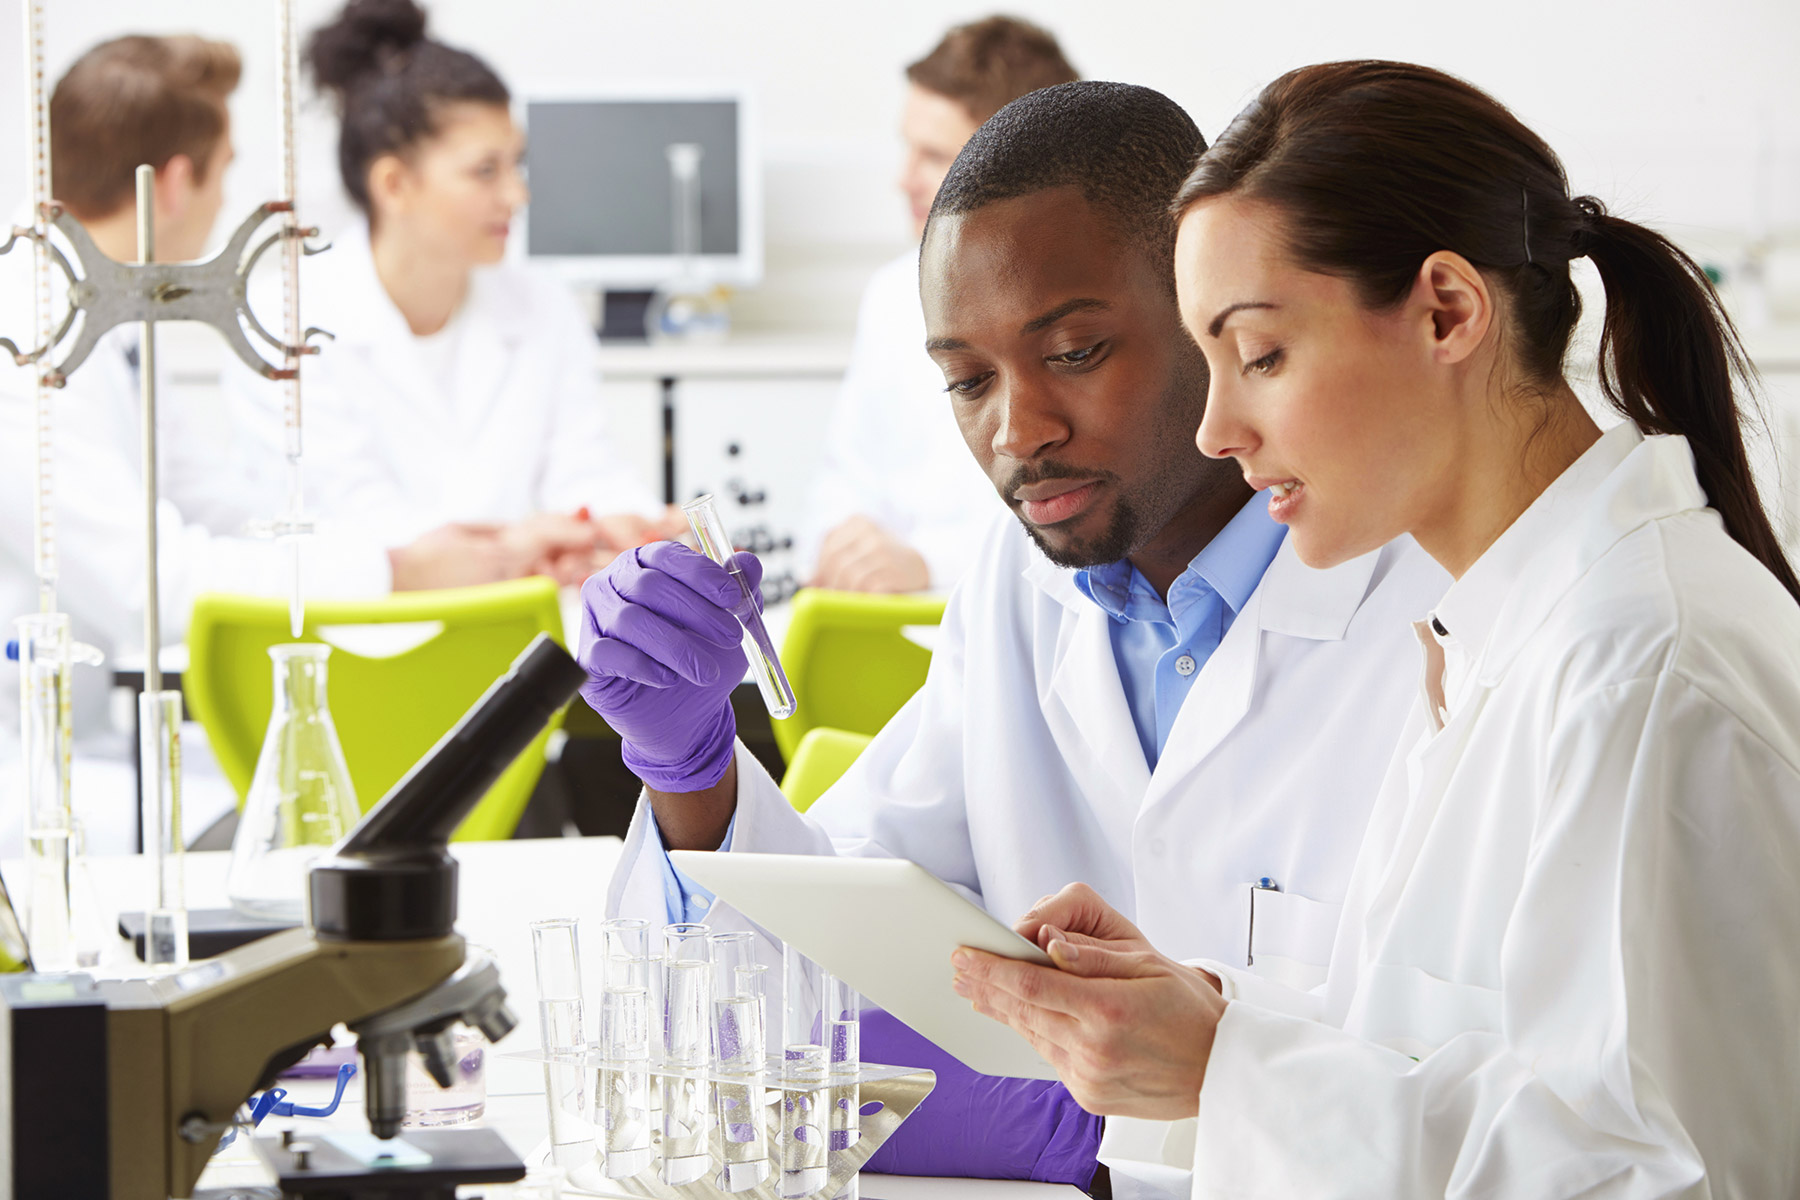 Paving the Methodology for Diversity in Scientific Trials